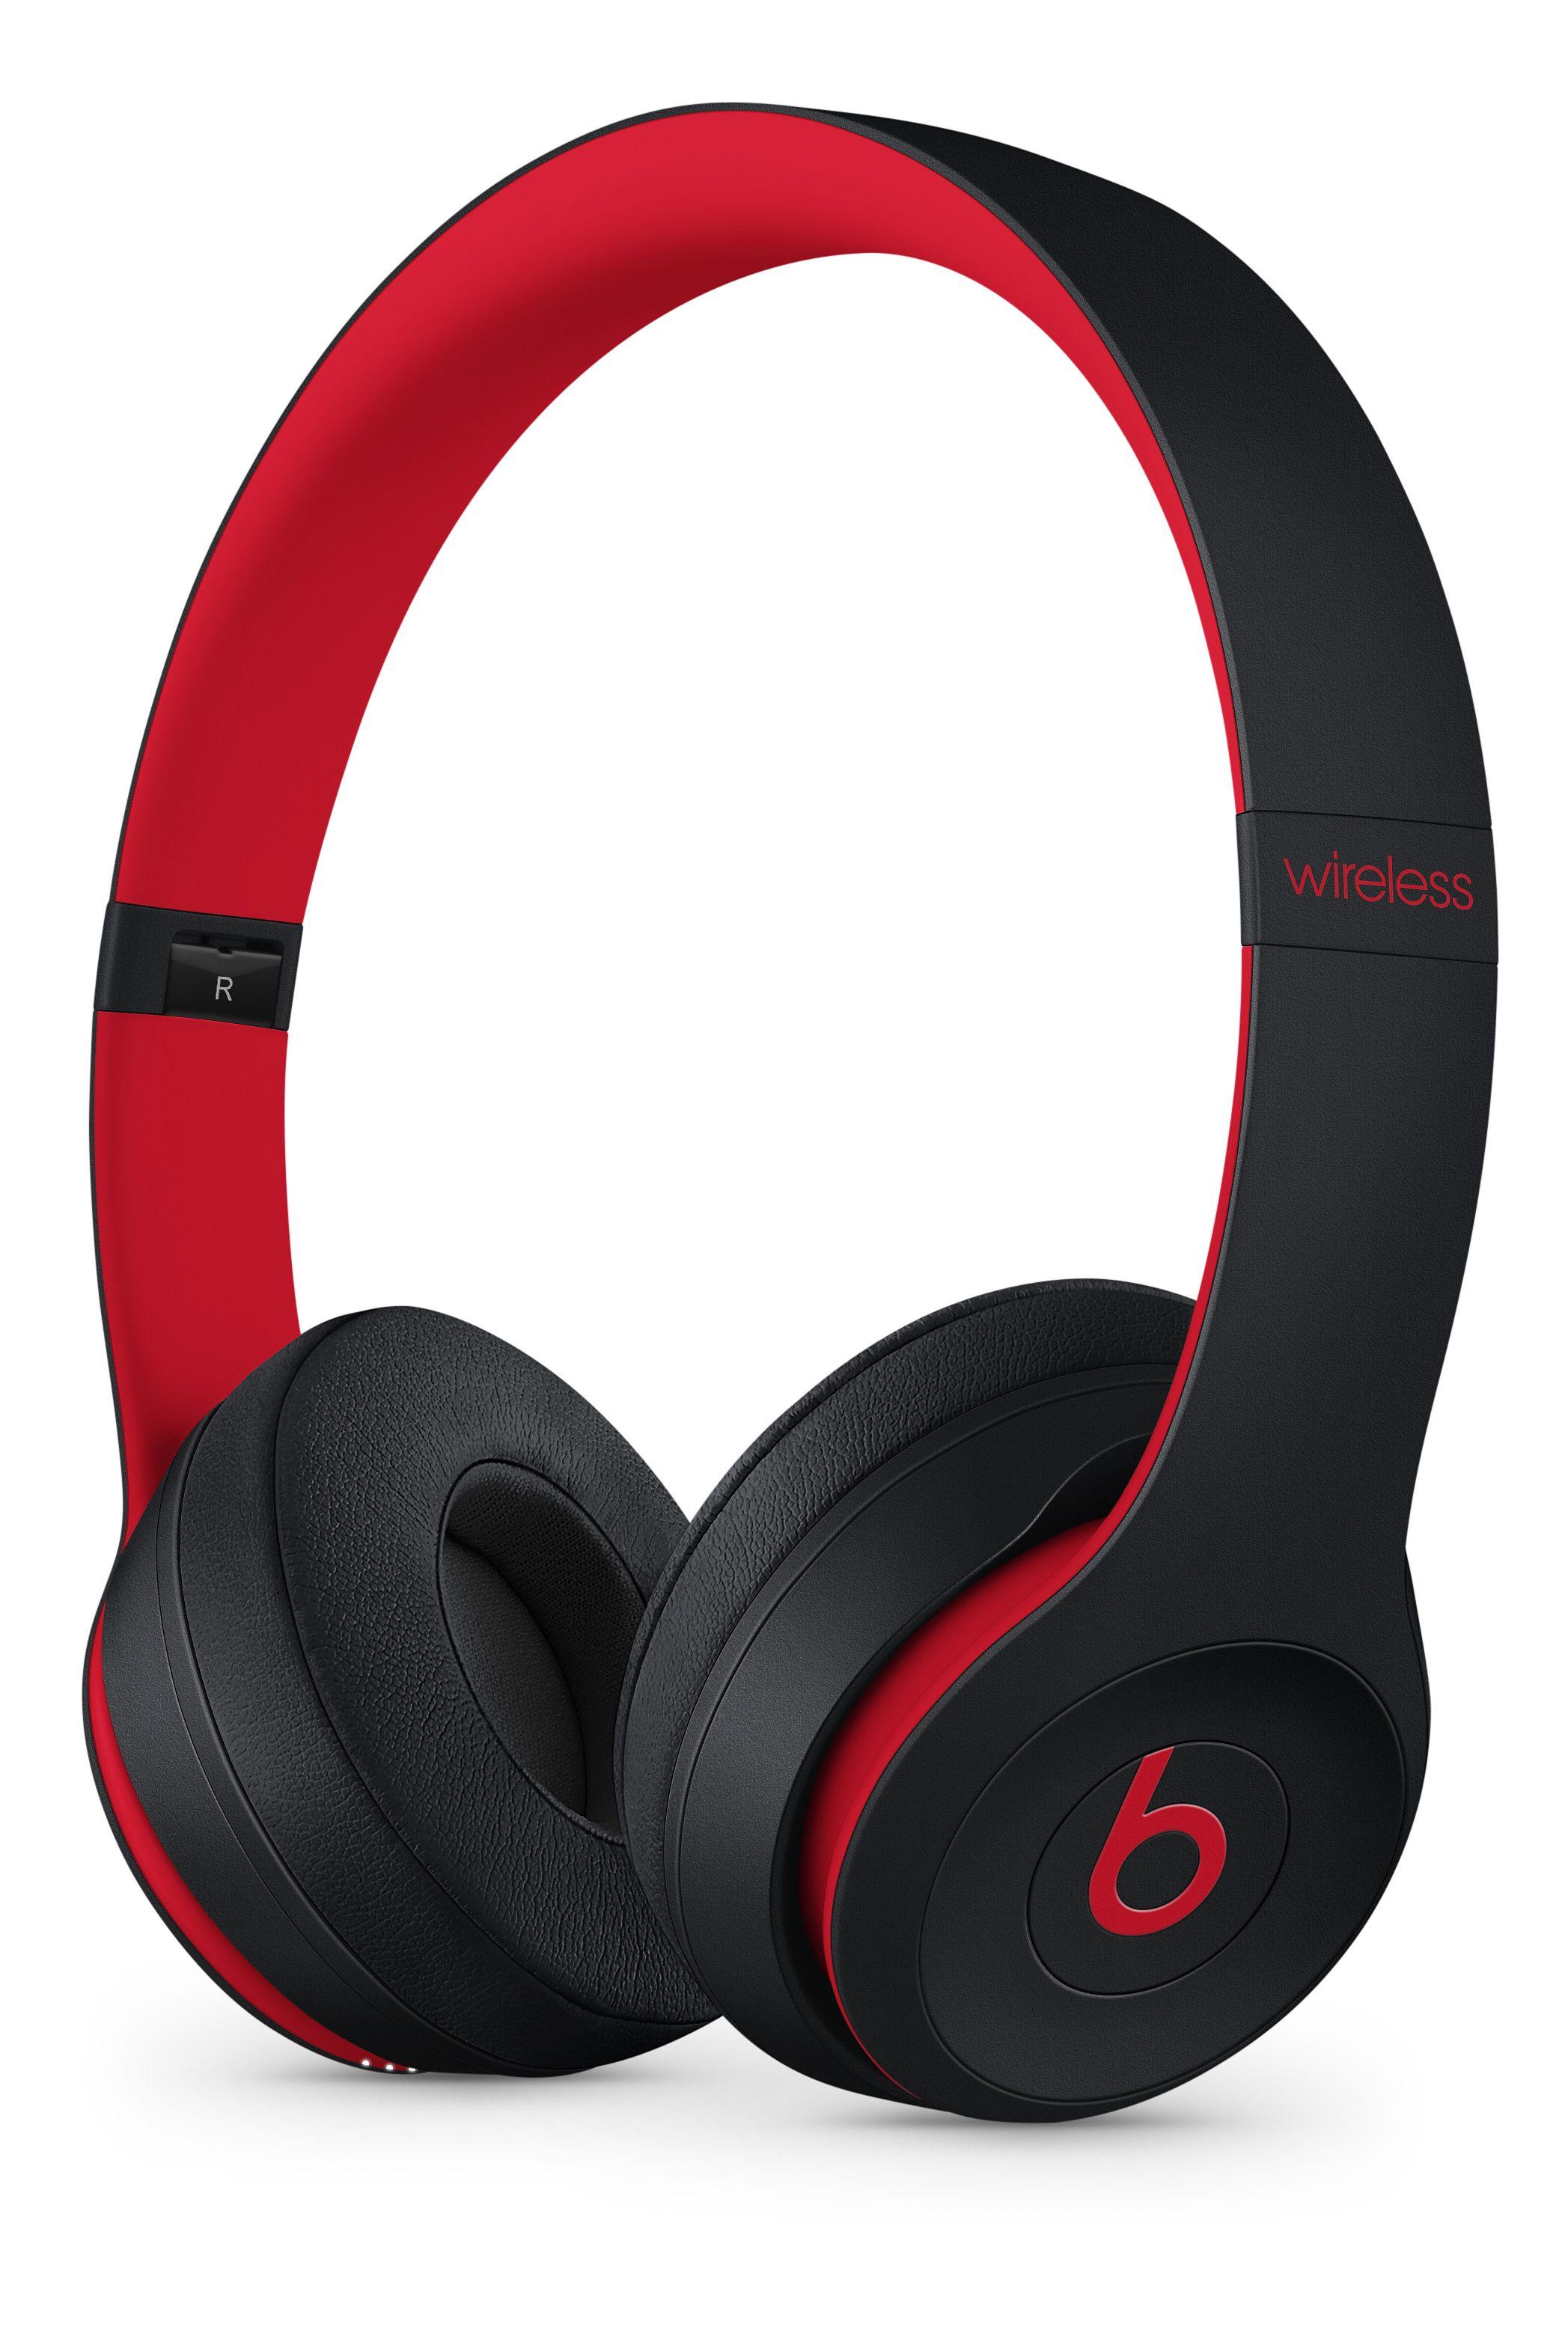 Red and Black Beats Logo - Beats Solo3 Wireless Black Red (UK)